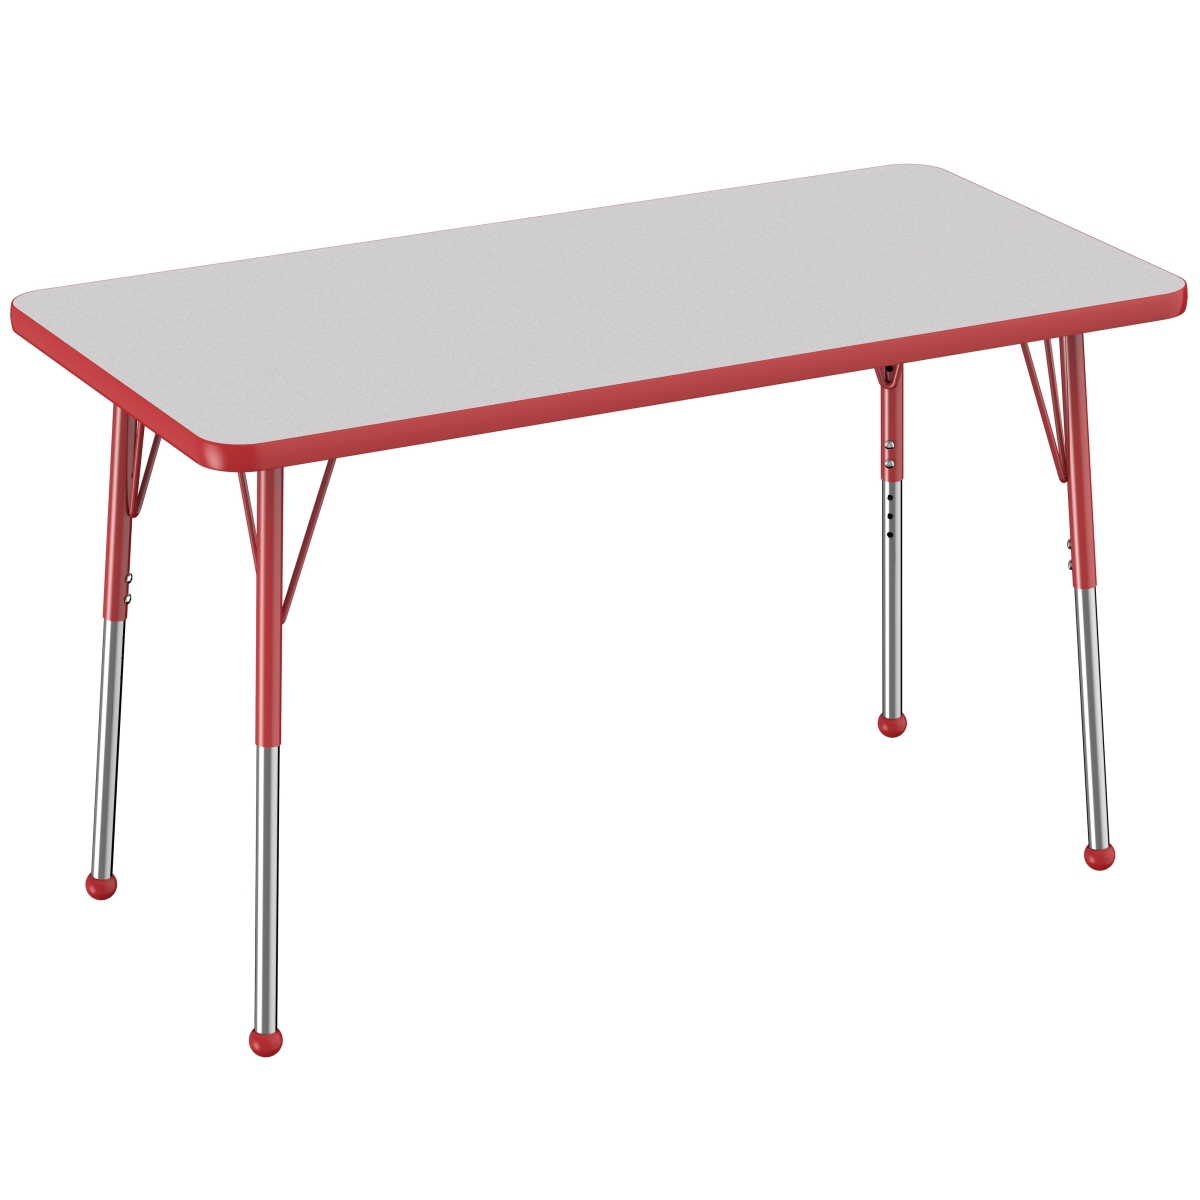 10008-gyrd 24 X 48 In. Rectangle T-mold Adjustable Activity Table With Standard Ball - Grey & Red